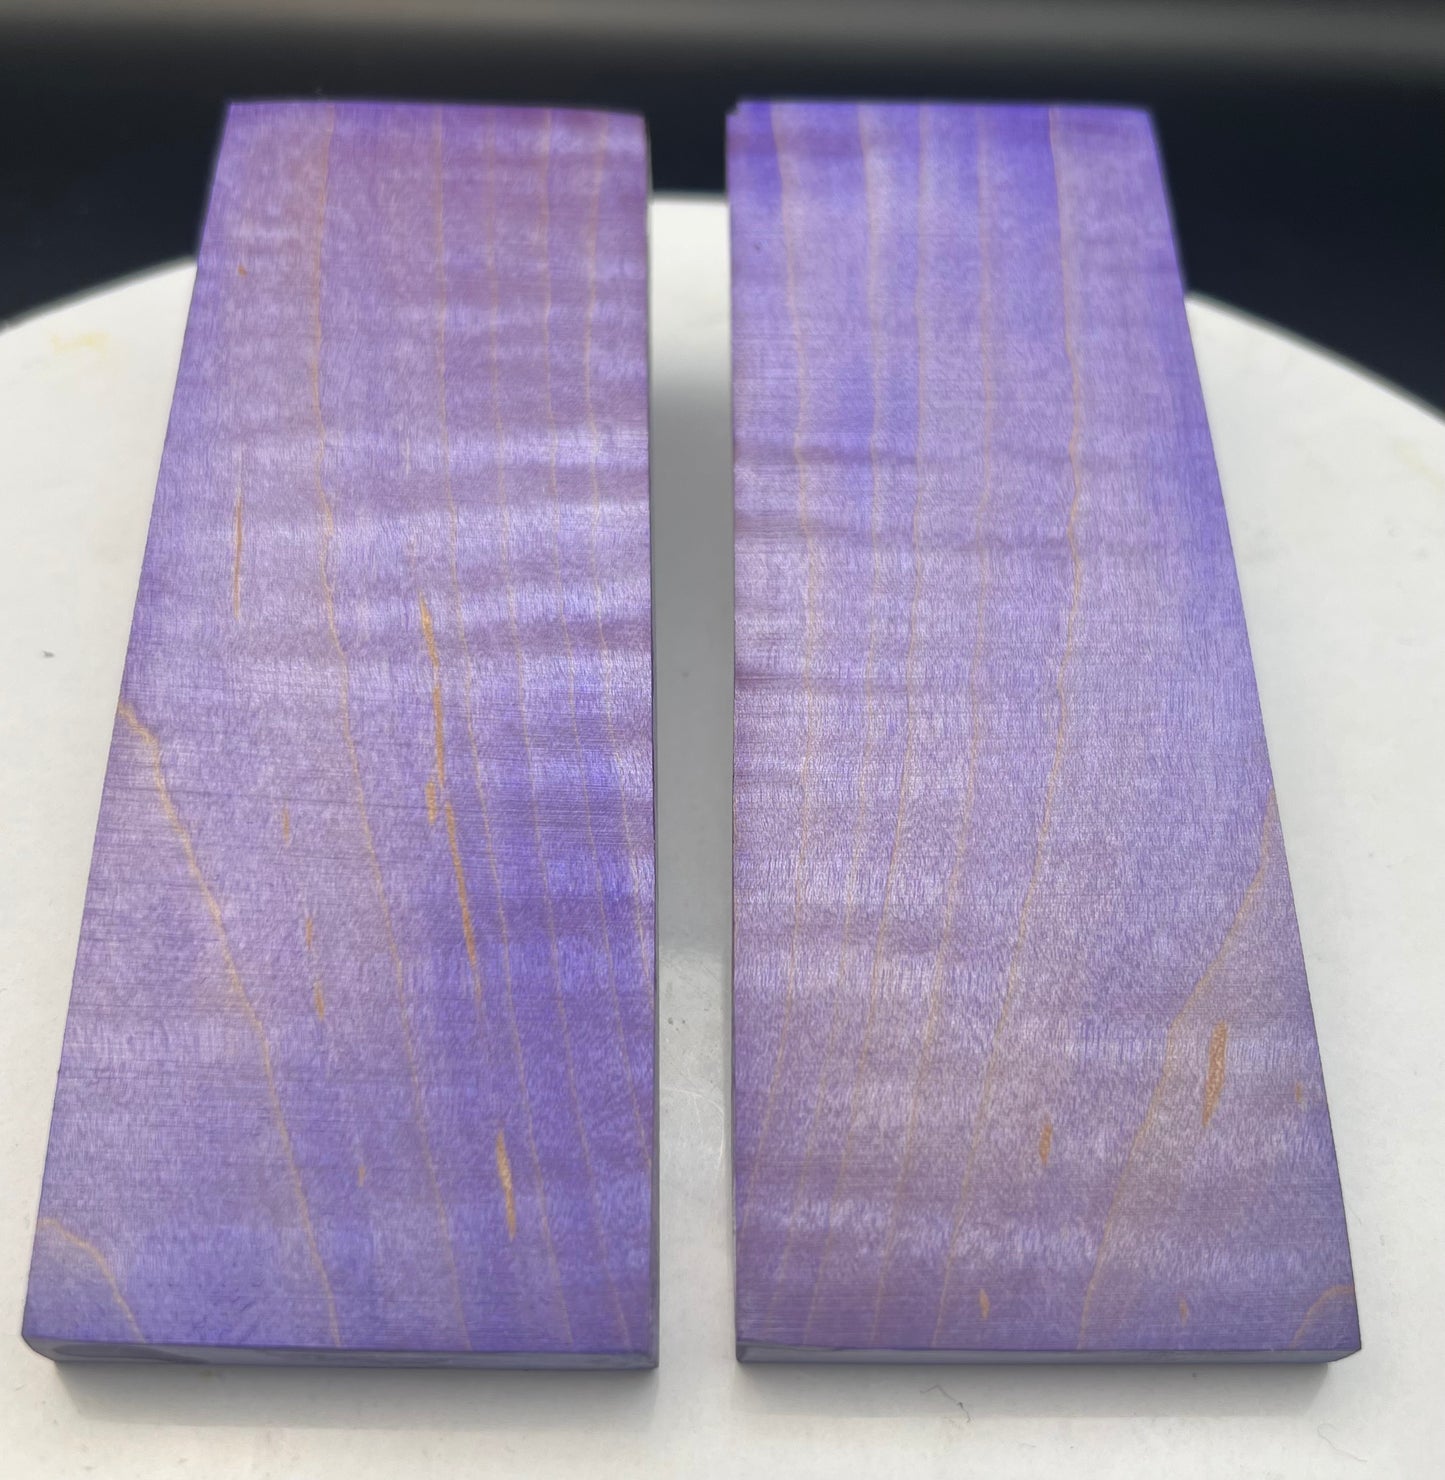 Stabilized Curly Maple knife Scales Purple